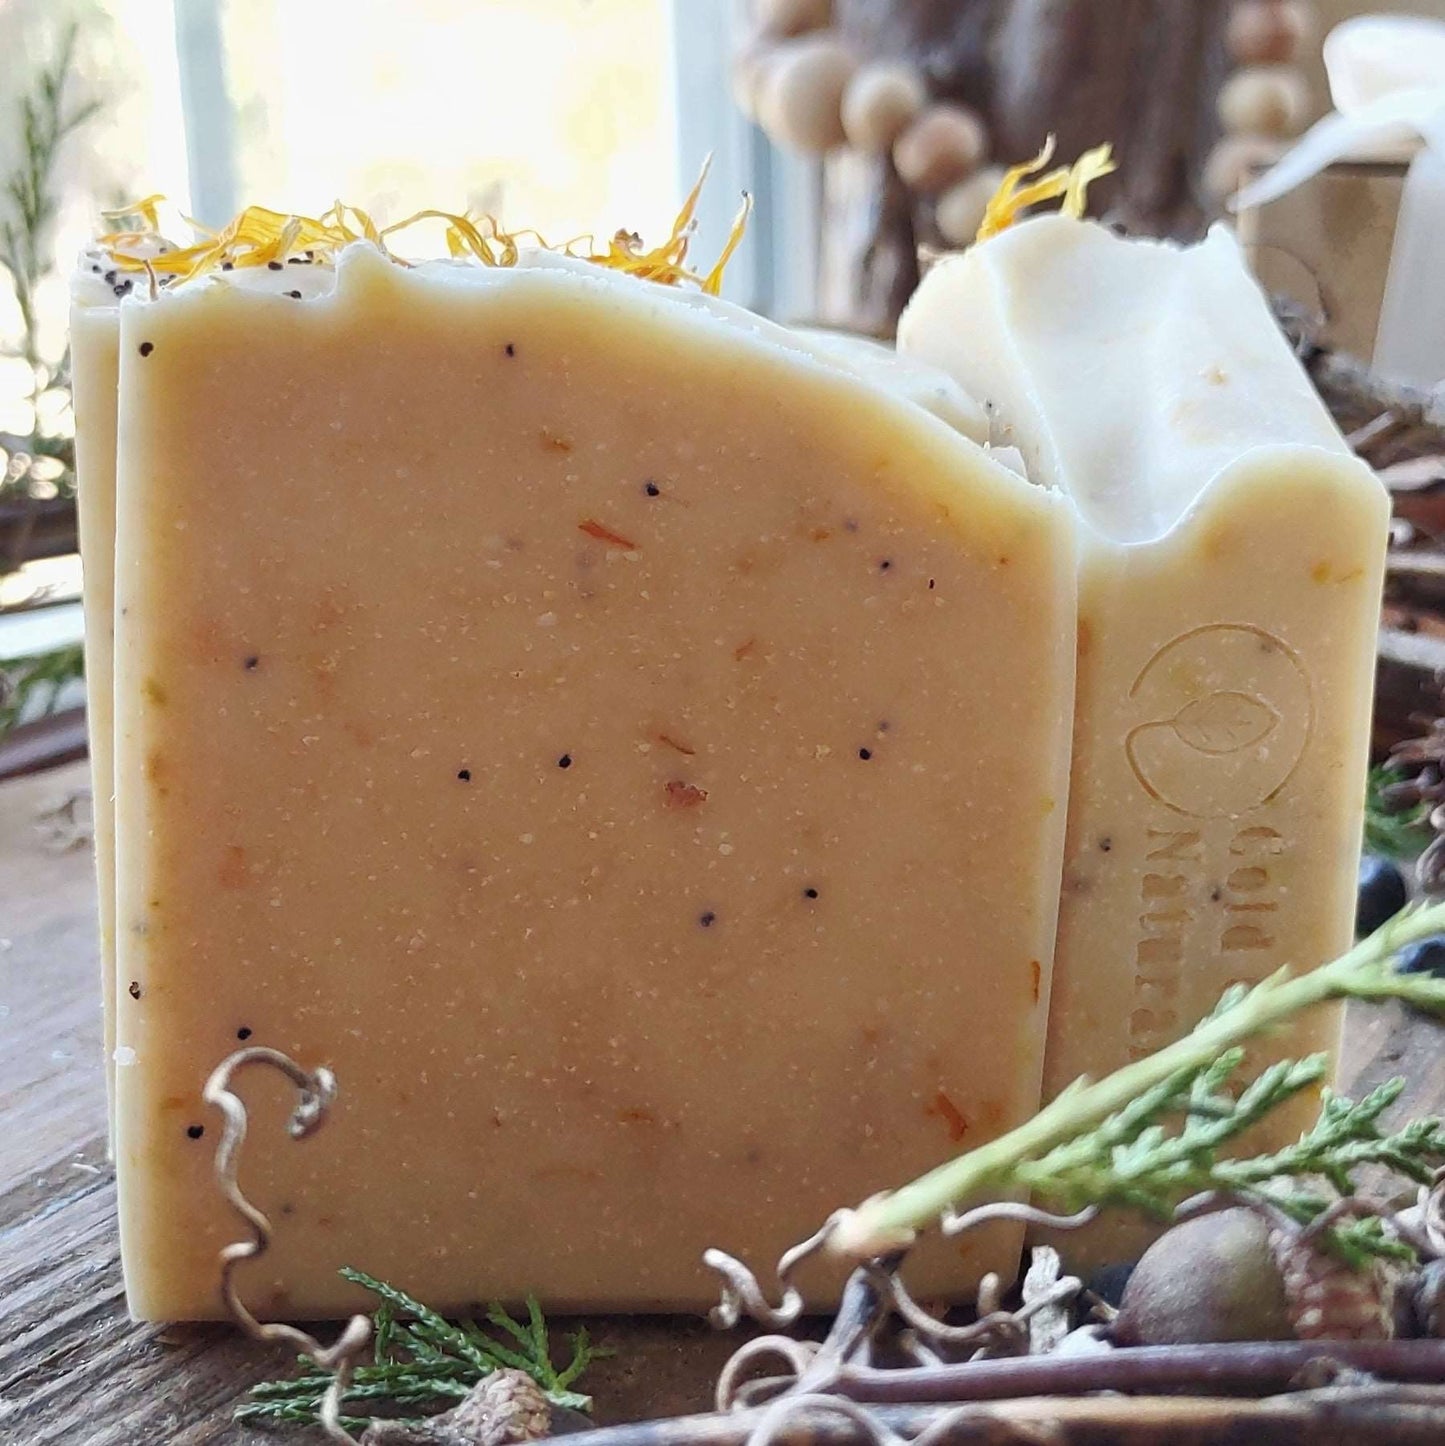 Blood Orange & Poppyseed - Goat Milk - Artisan Handcrafted Goat Milk Soap - Holiday Collection - Cold Creek Natural Farm